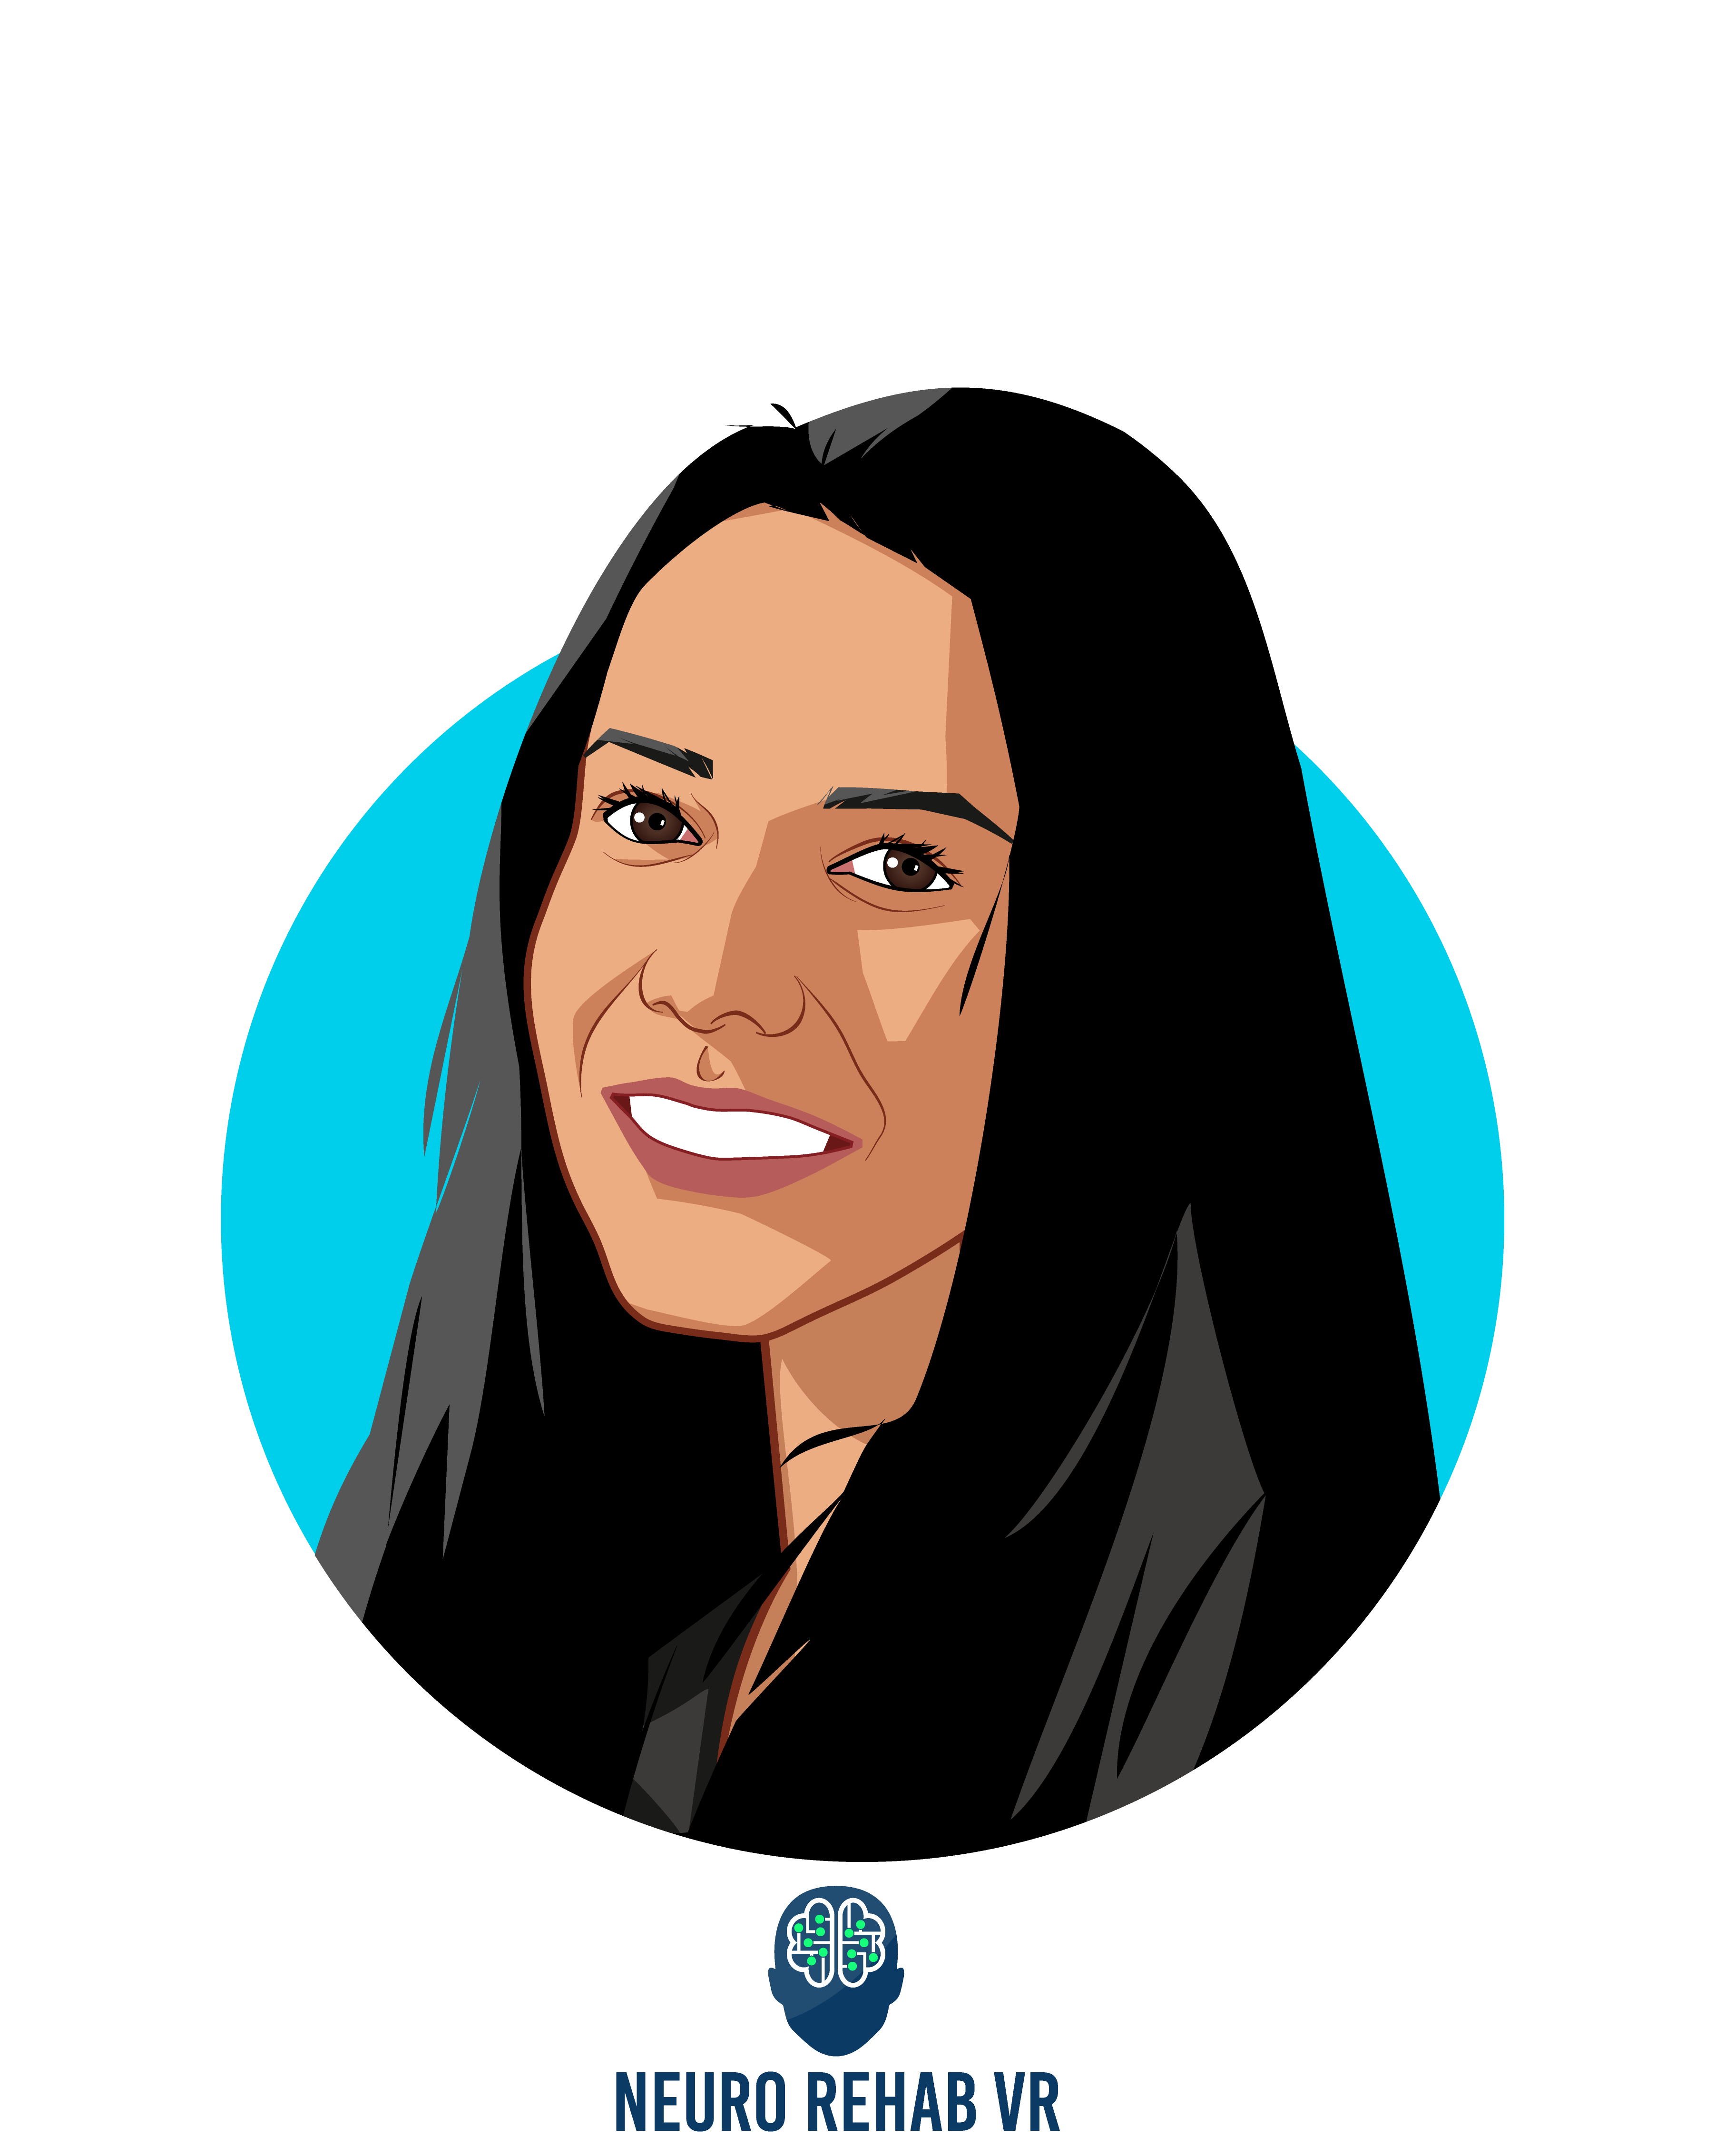 Overlay caricature of Veena Somareddy, who is speaking at HLTH and is Co-founder & CTO at Neuro Rehab VR